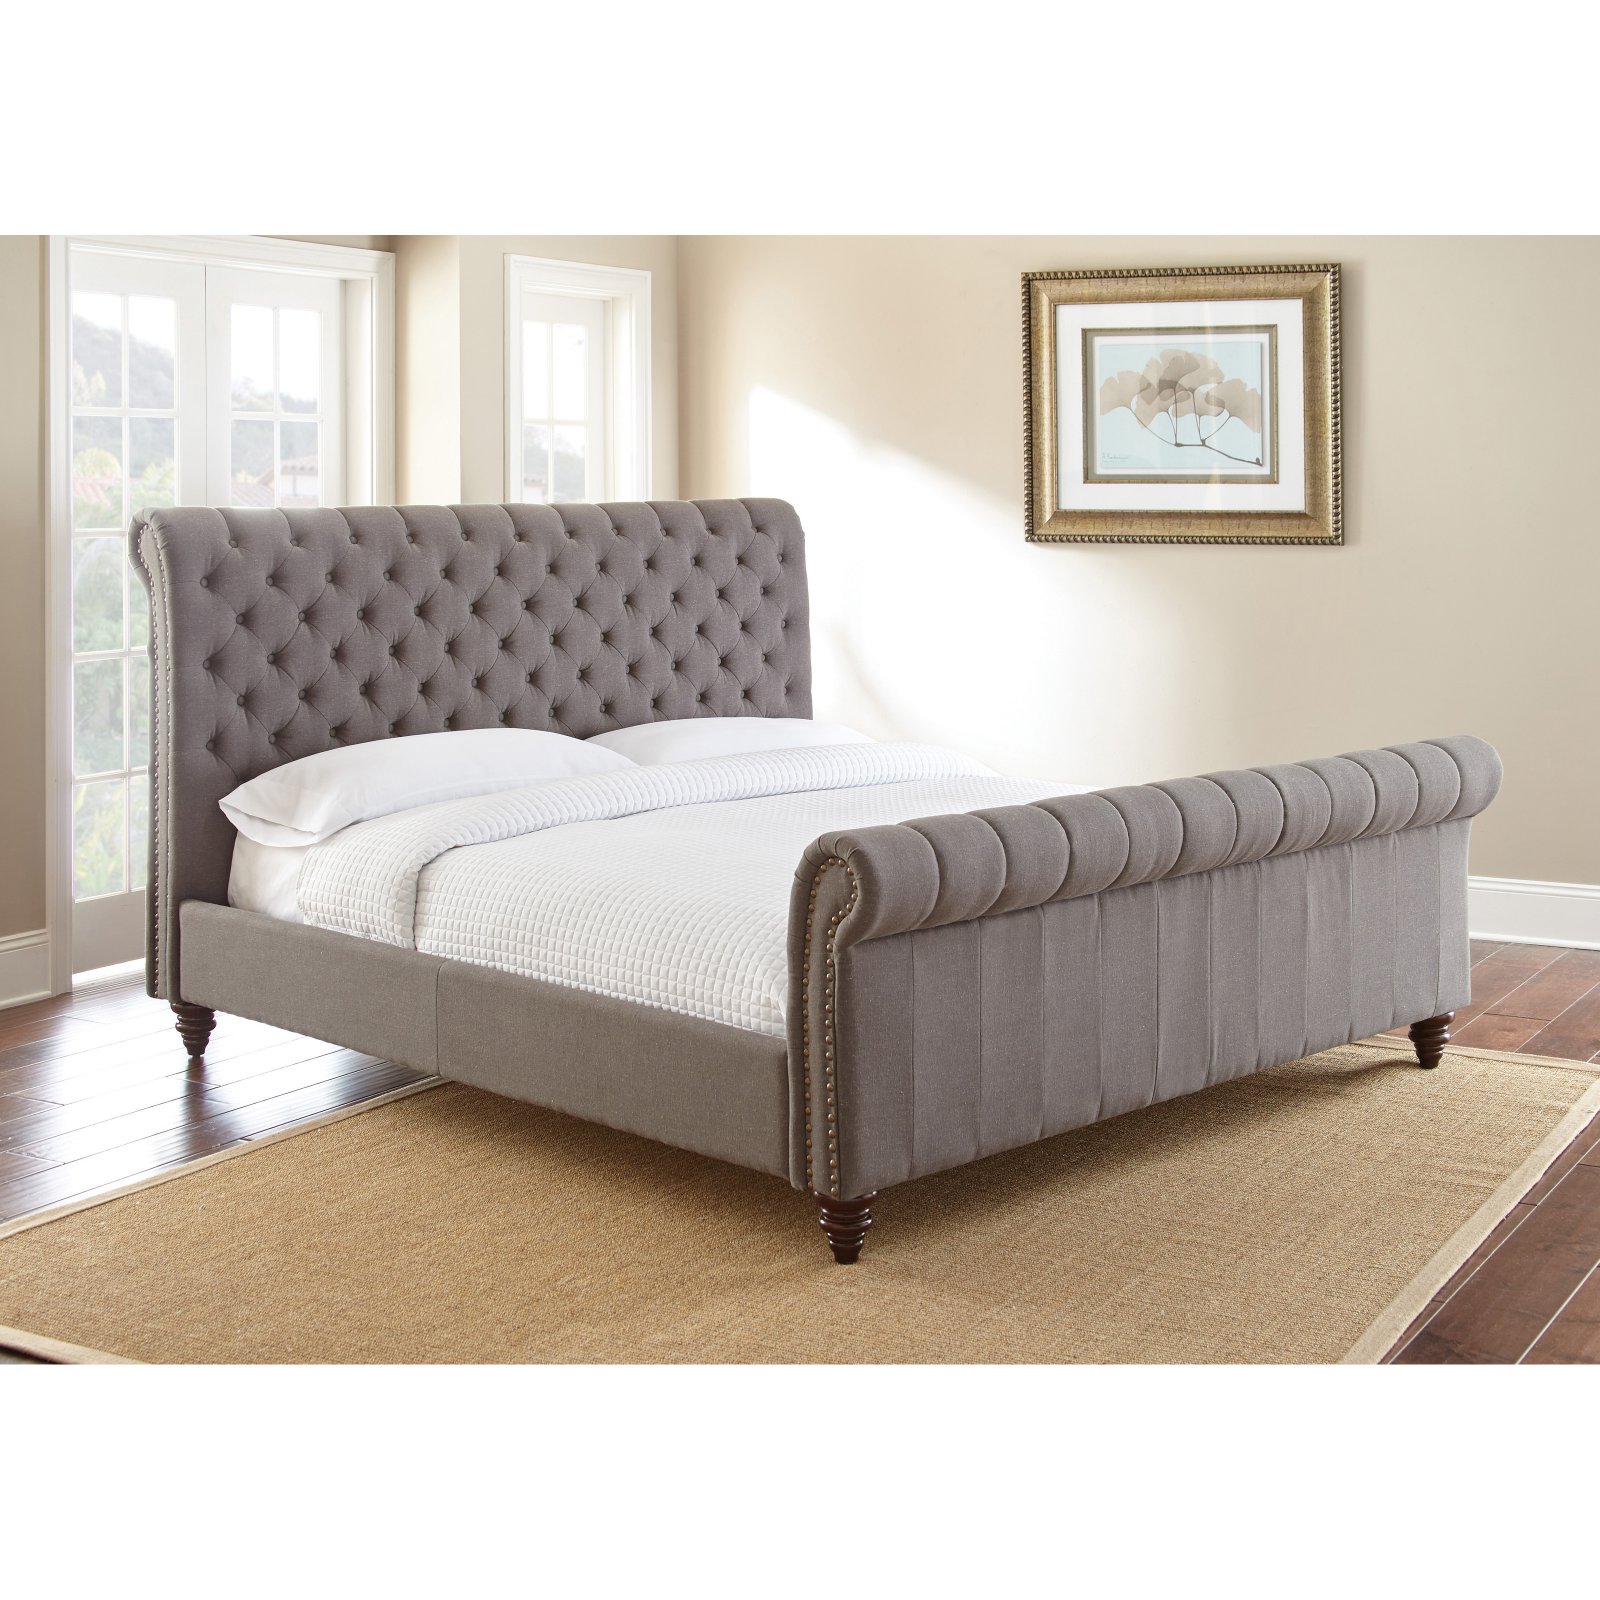 Swanson Tufted King Sleigh Bed in Sand Beige Upholstery - image 2 of 10